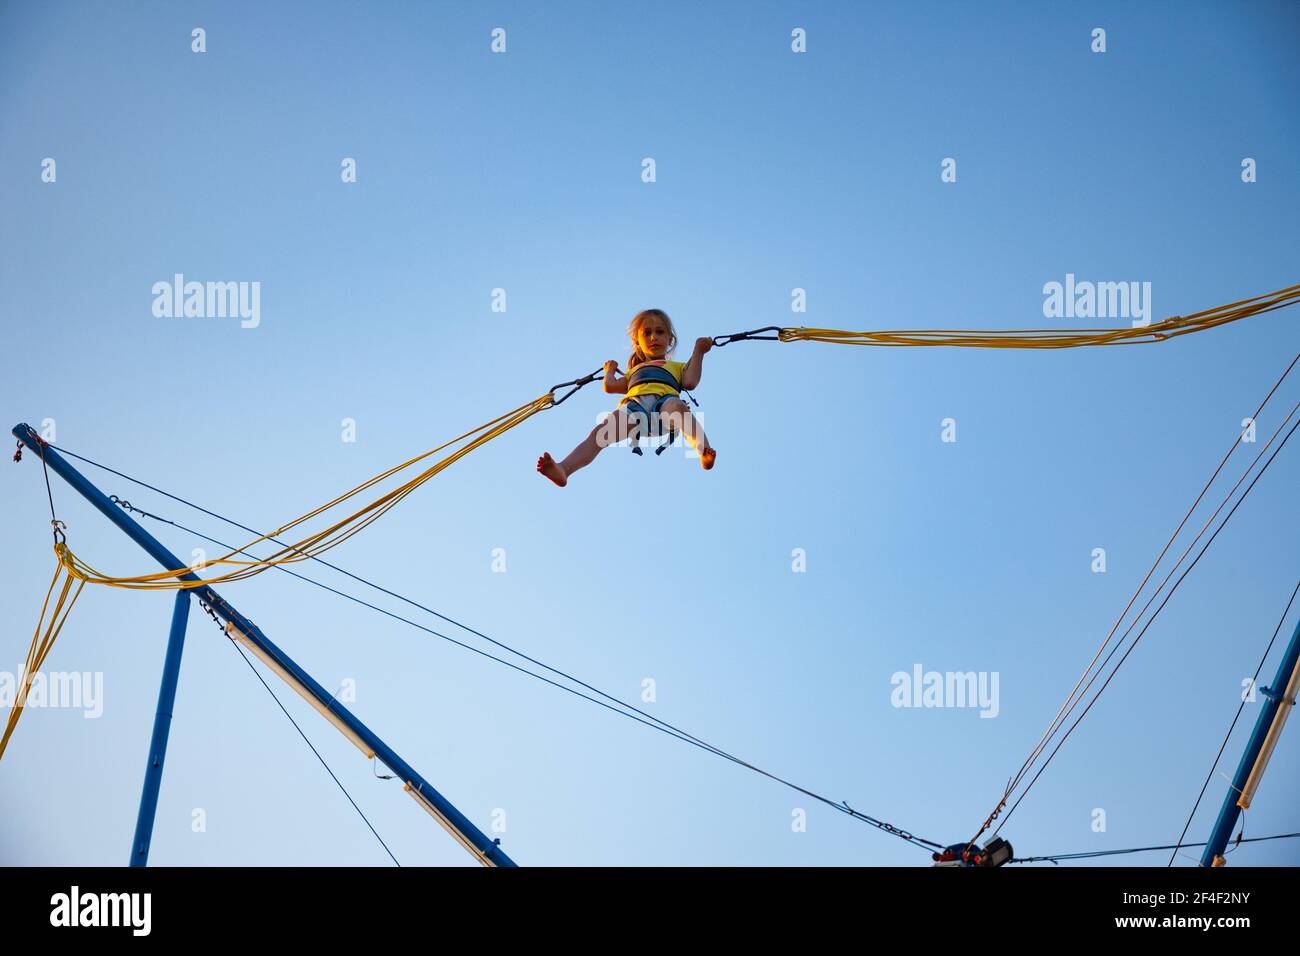 A little cheerful girl flies on springy bright elastic bands and jumps on a  trampoline enjoying the long-awaited vacation in the warm sun Stock Photo -  Alamy